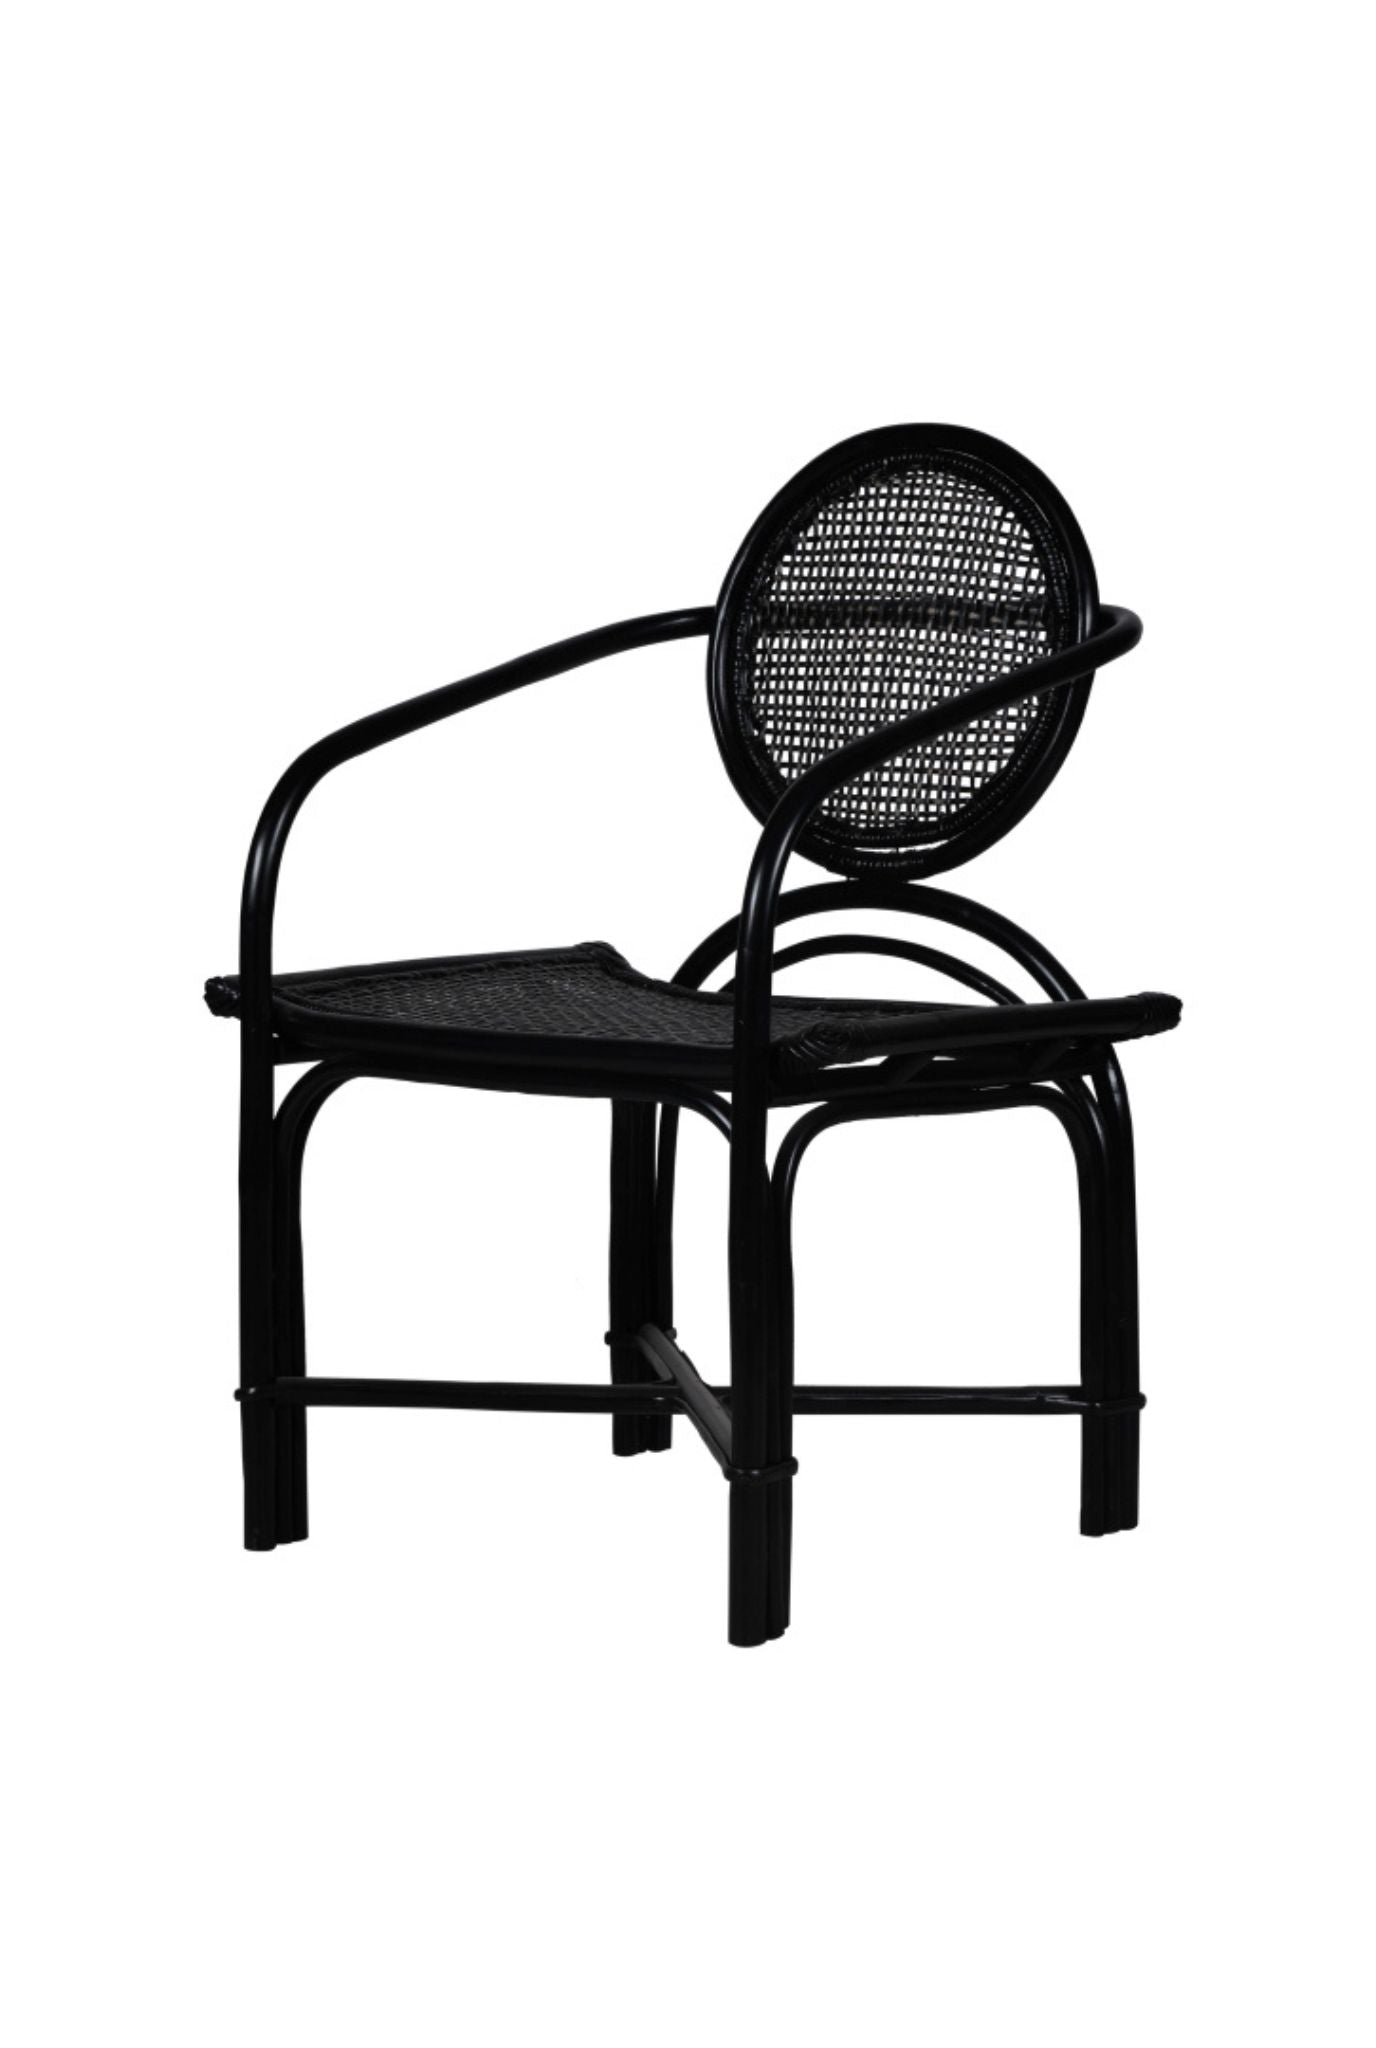 Sungro Bamboo Chair (SHIPPING ONLY IN INDIA)